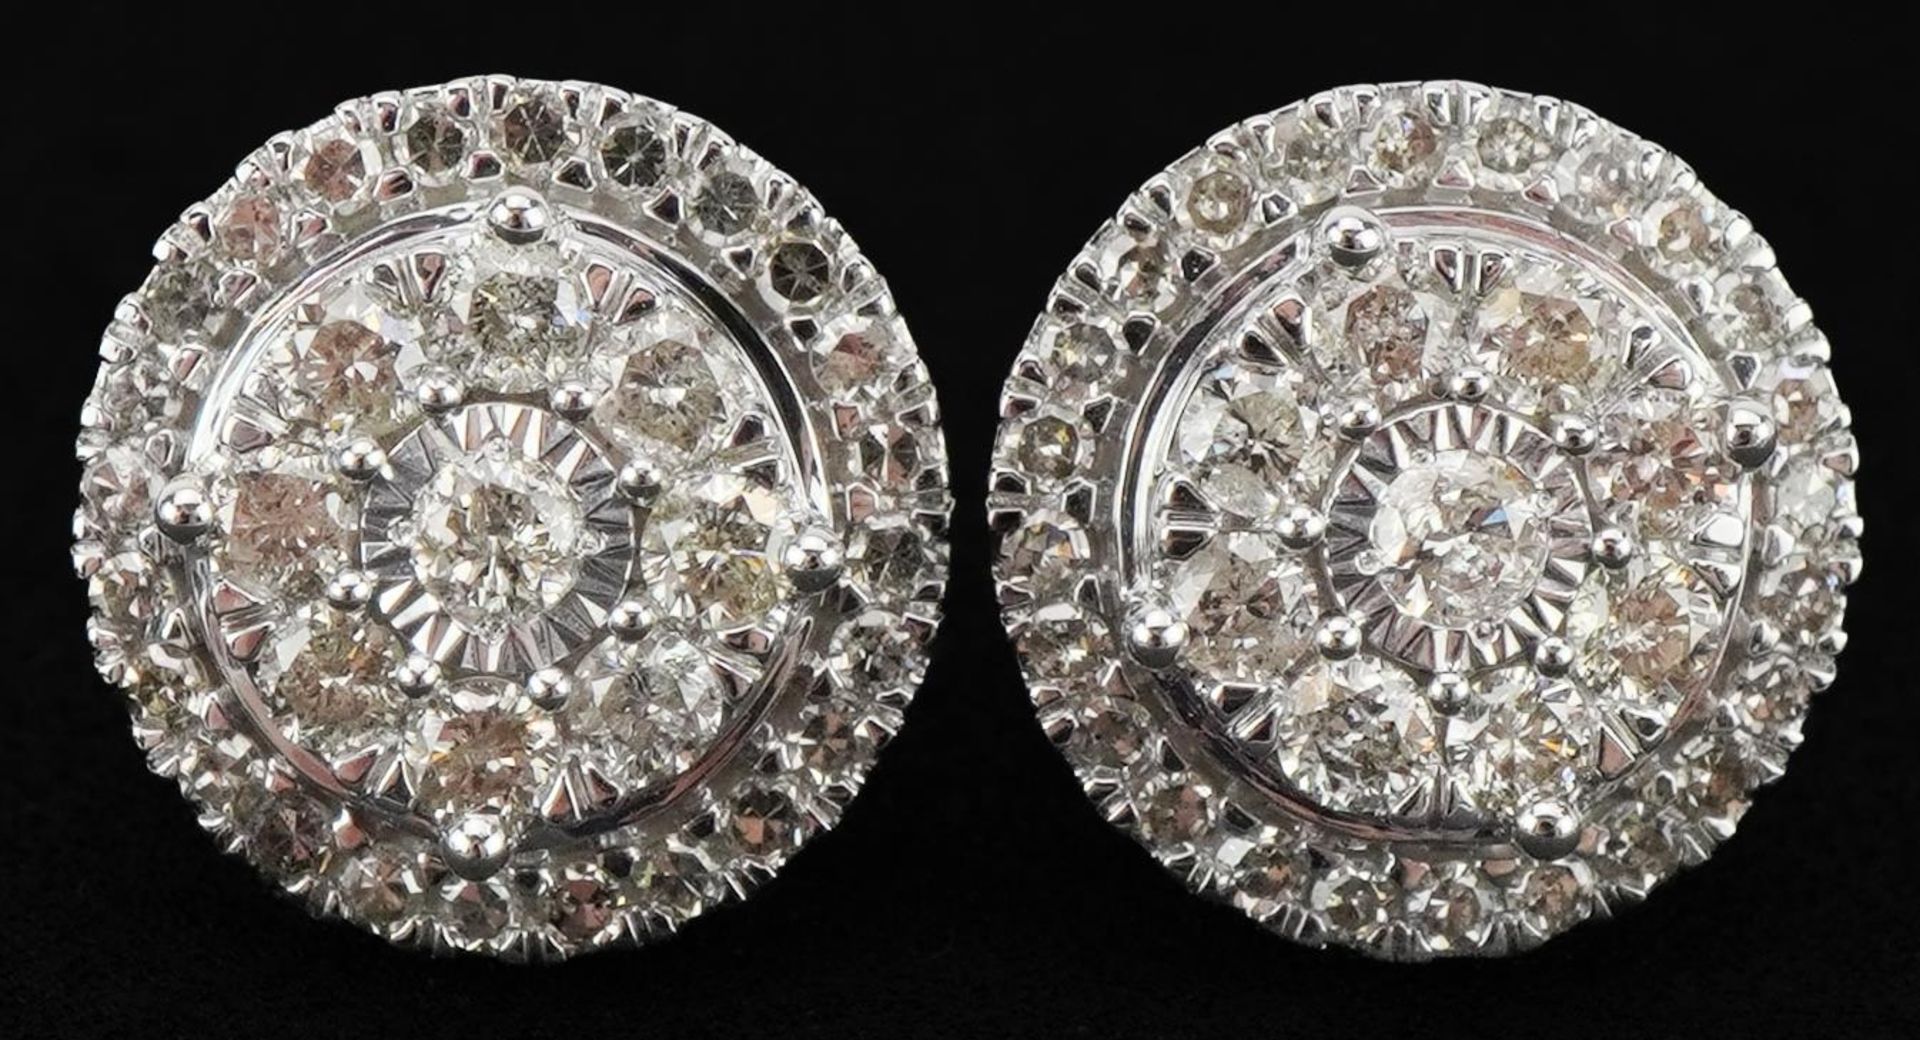 Pair of 9ct white gold diamond cluster stud earrings, total diamond weight approximately 1.0